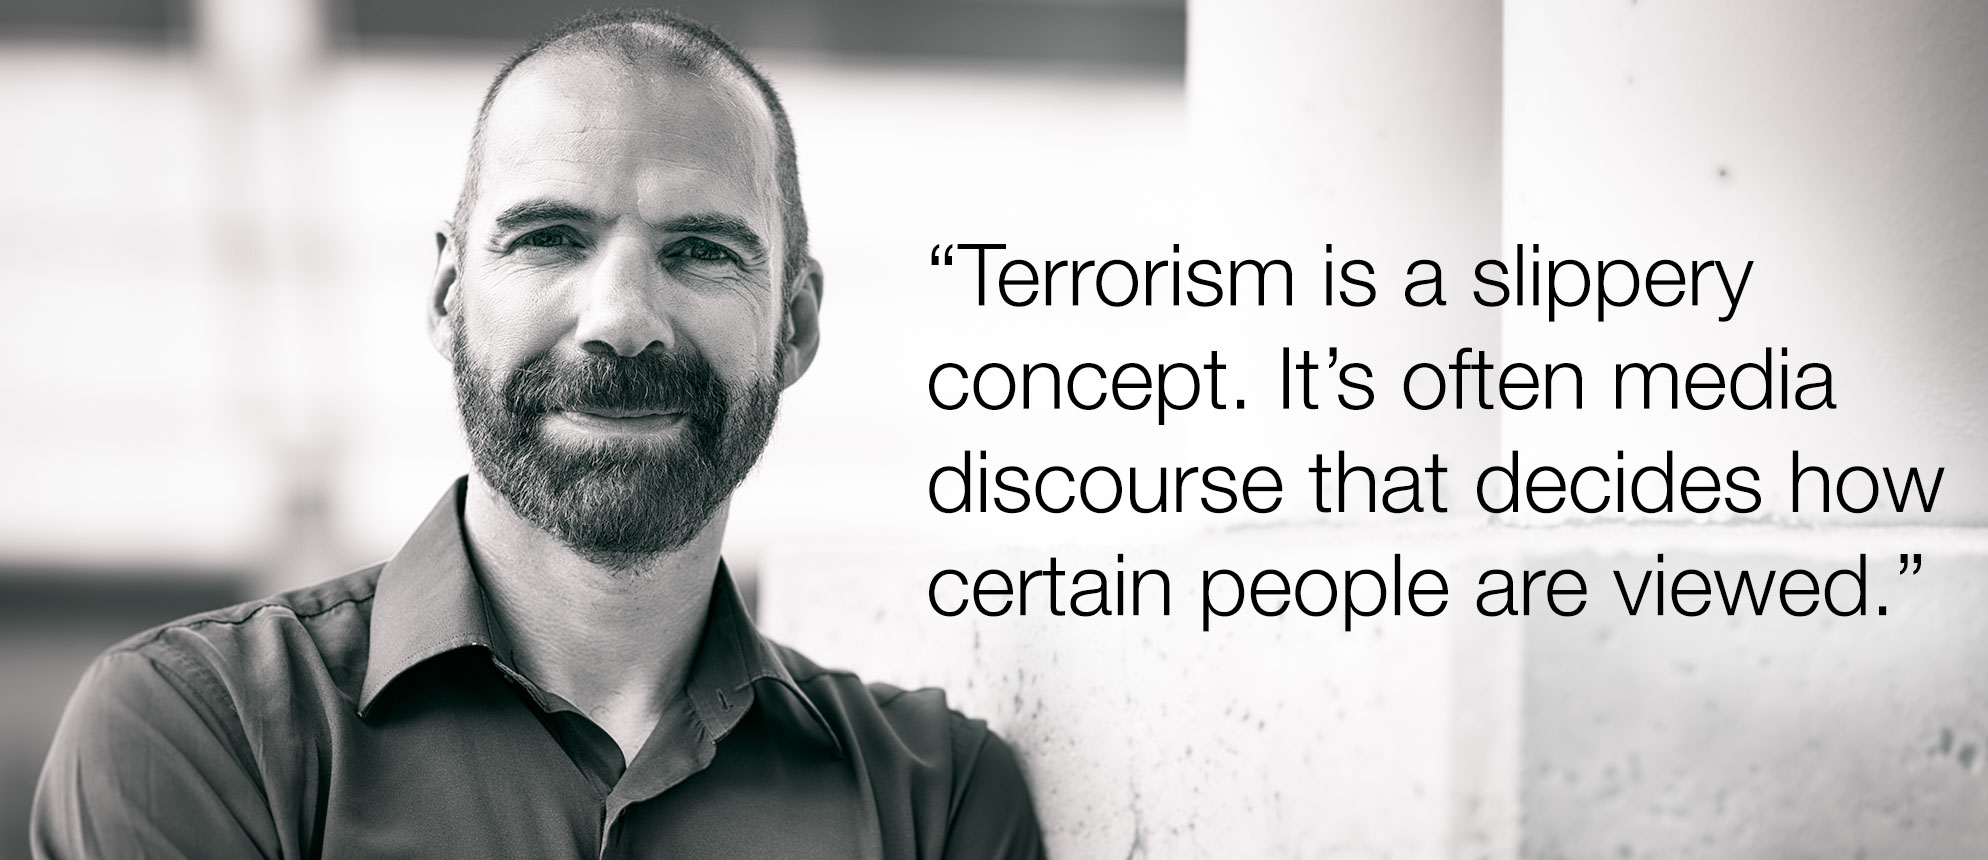 Dr. Don Moore: "Terrorism is a slippery concept. It's often media discourse that decides how certain people are viewed."